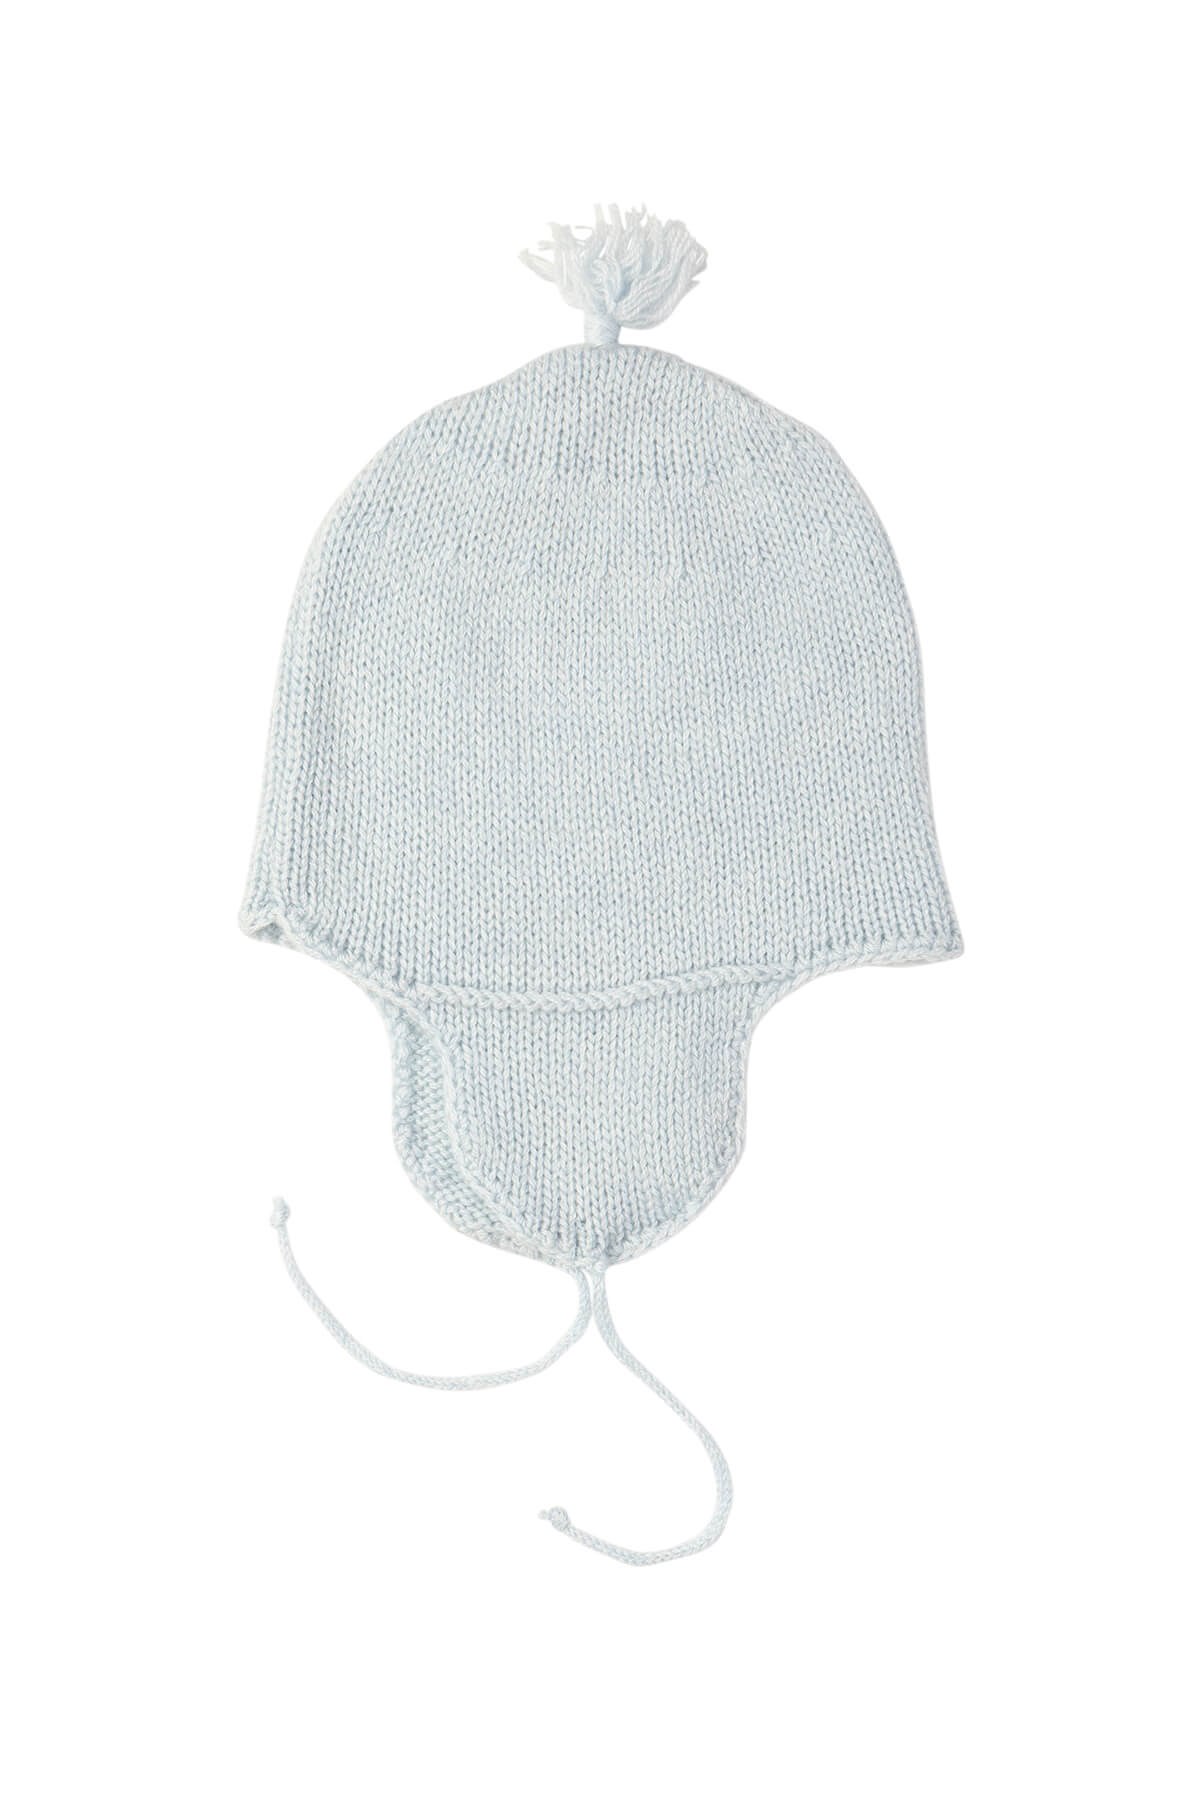 Johnstons of Elgin Hand Knitted Cashmere Baby Hat with Hand Crocheted Details in Powder Blue on white background 617092809ONE